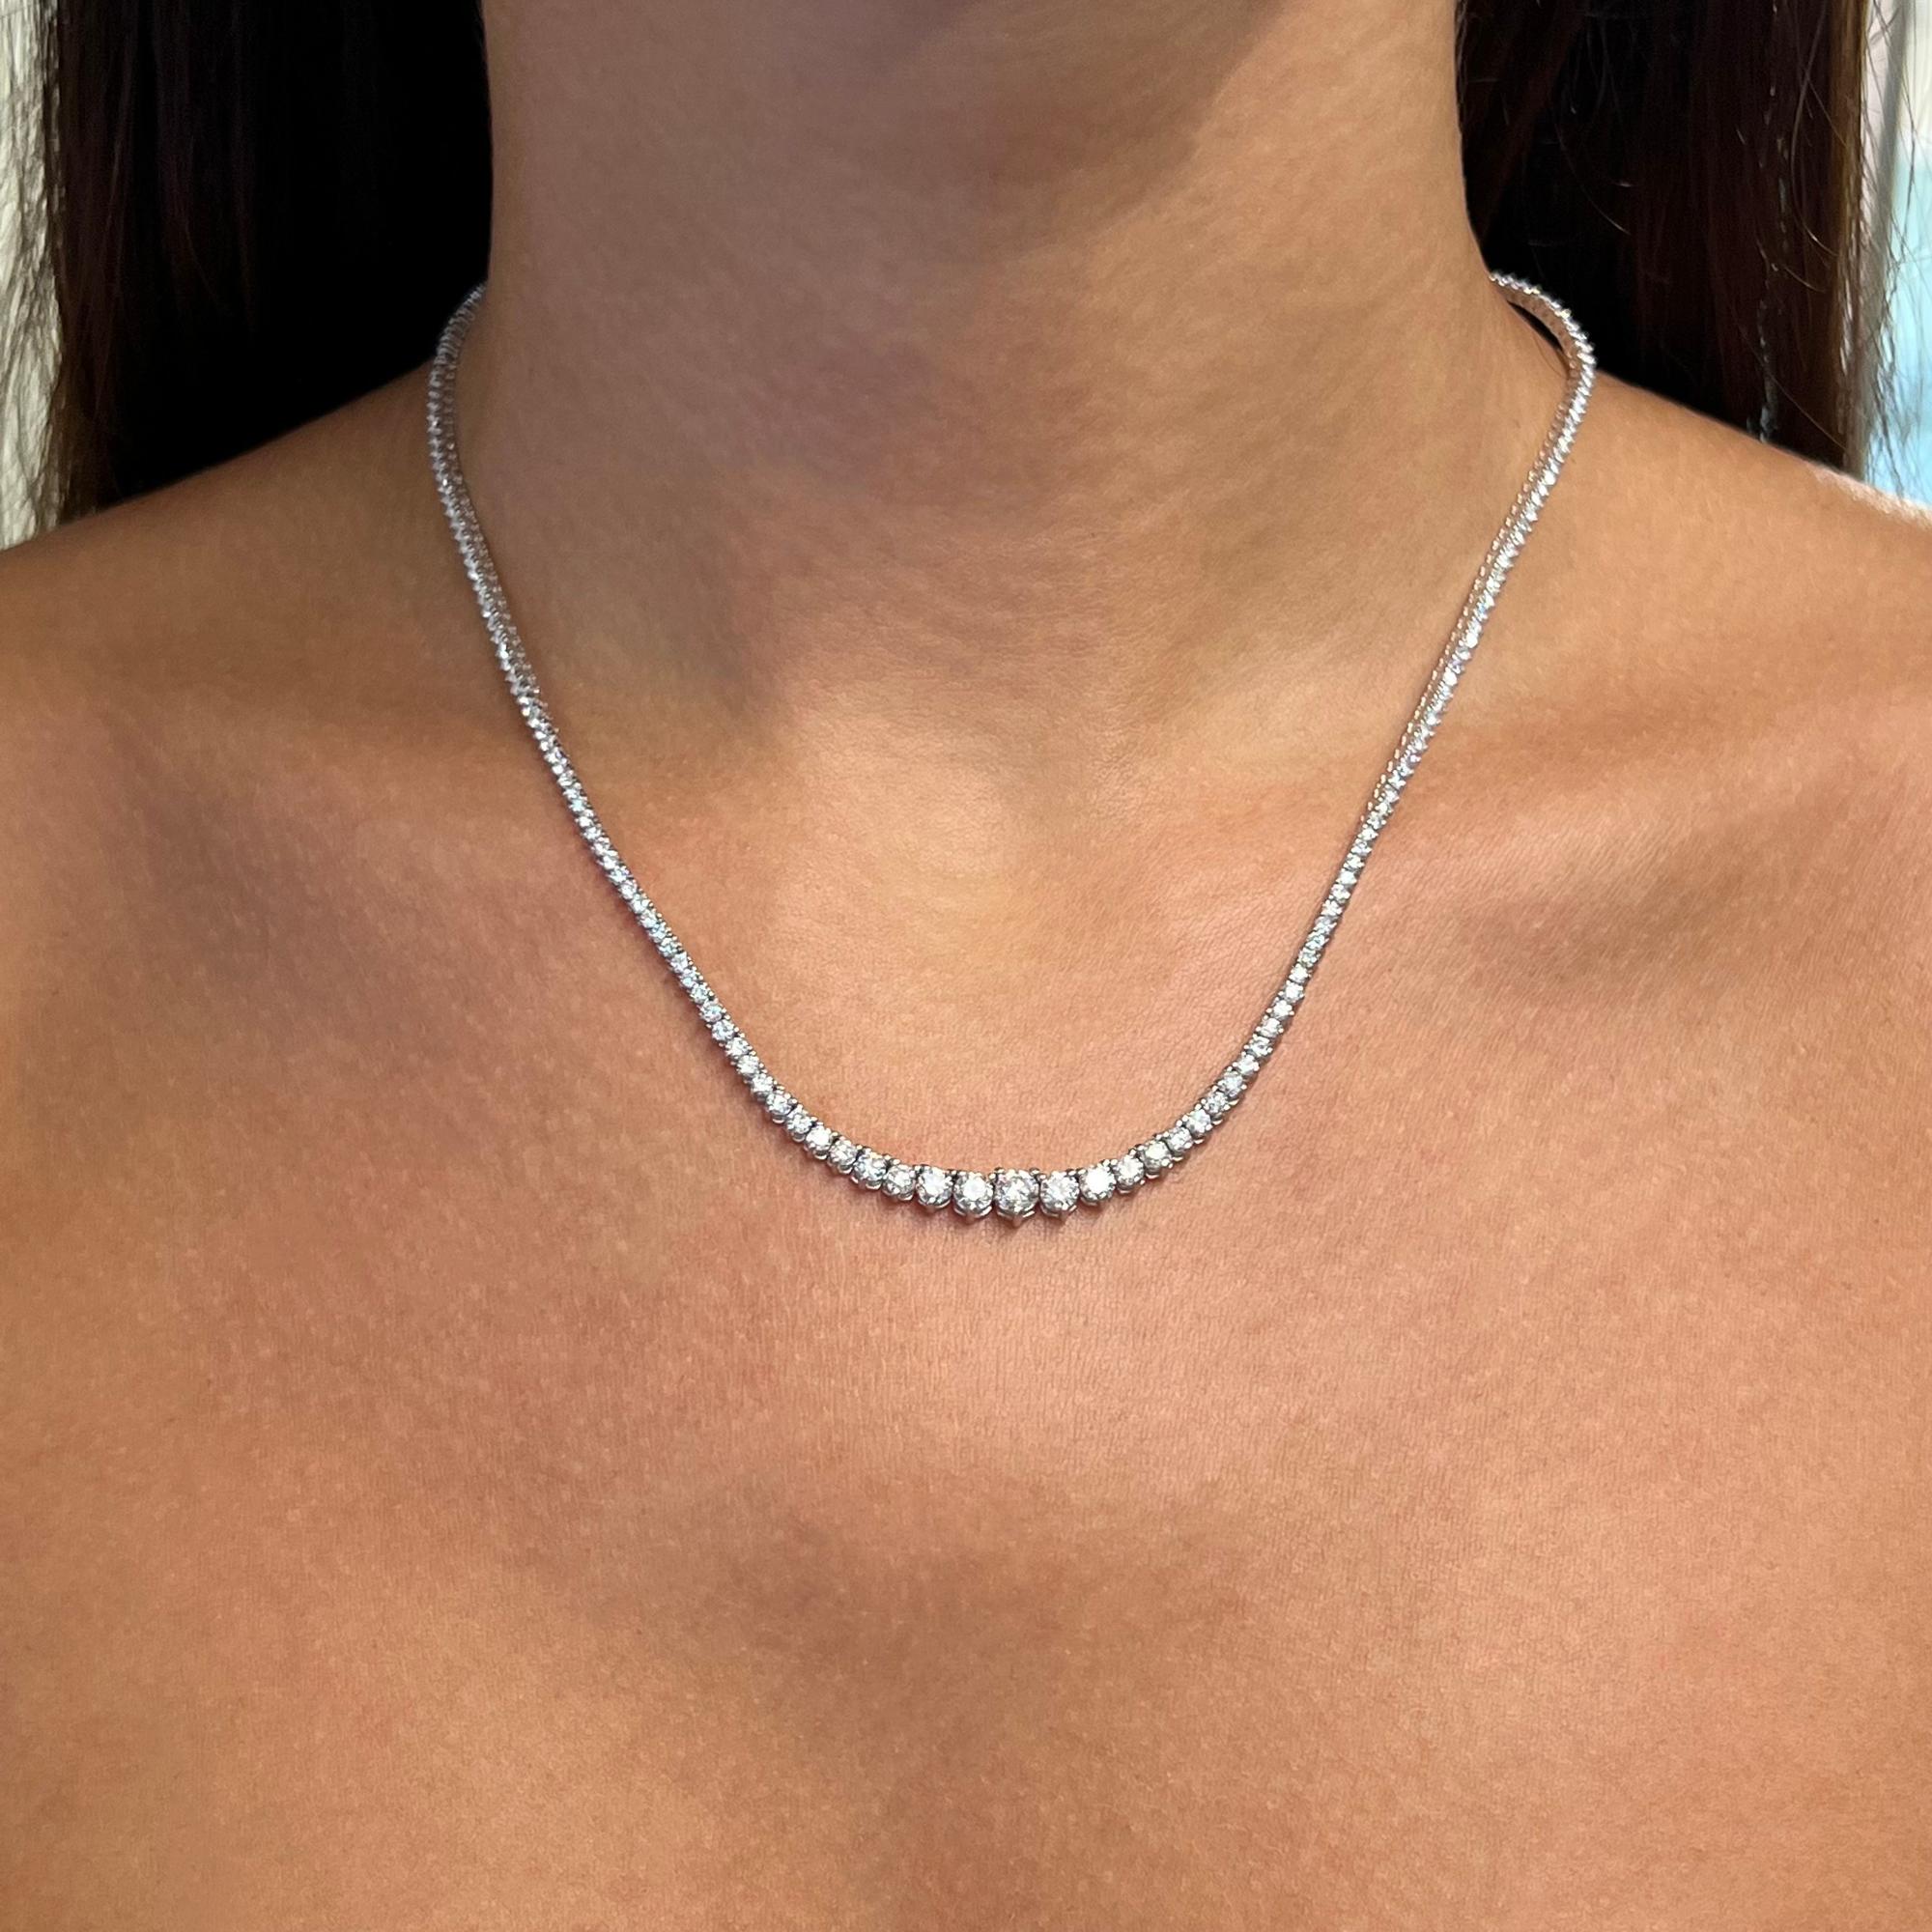 Rachel Koen 6.00Cttw Graduated Round Cut Diamond Tennis Necklace 18K White Gold In New Condition For Sale In New York, NY